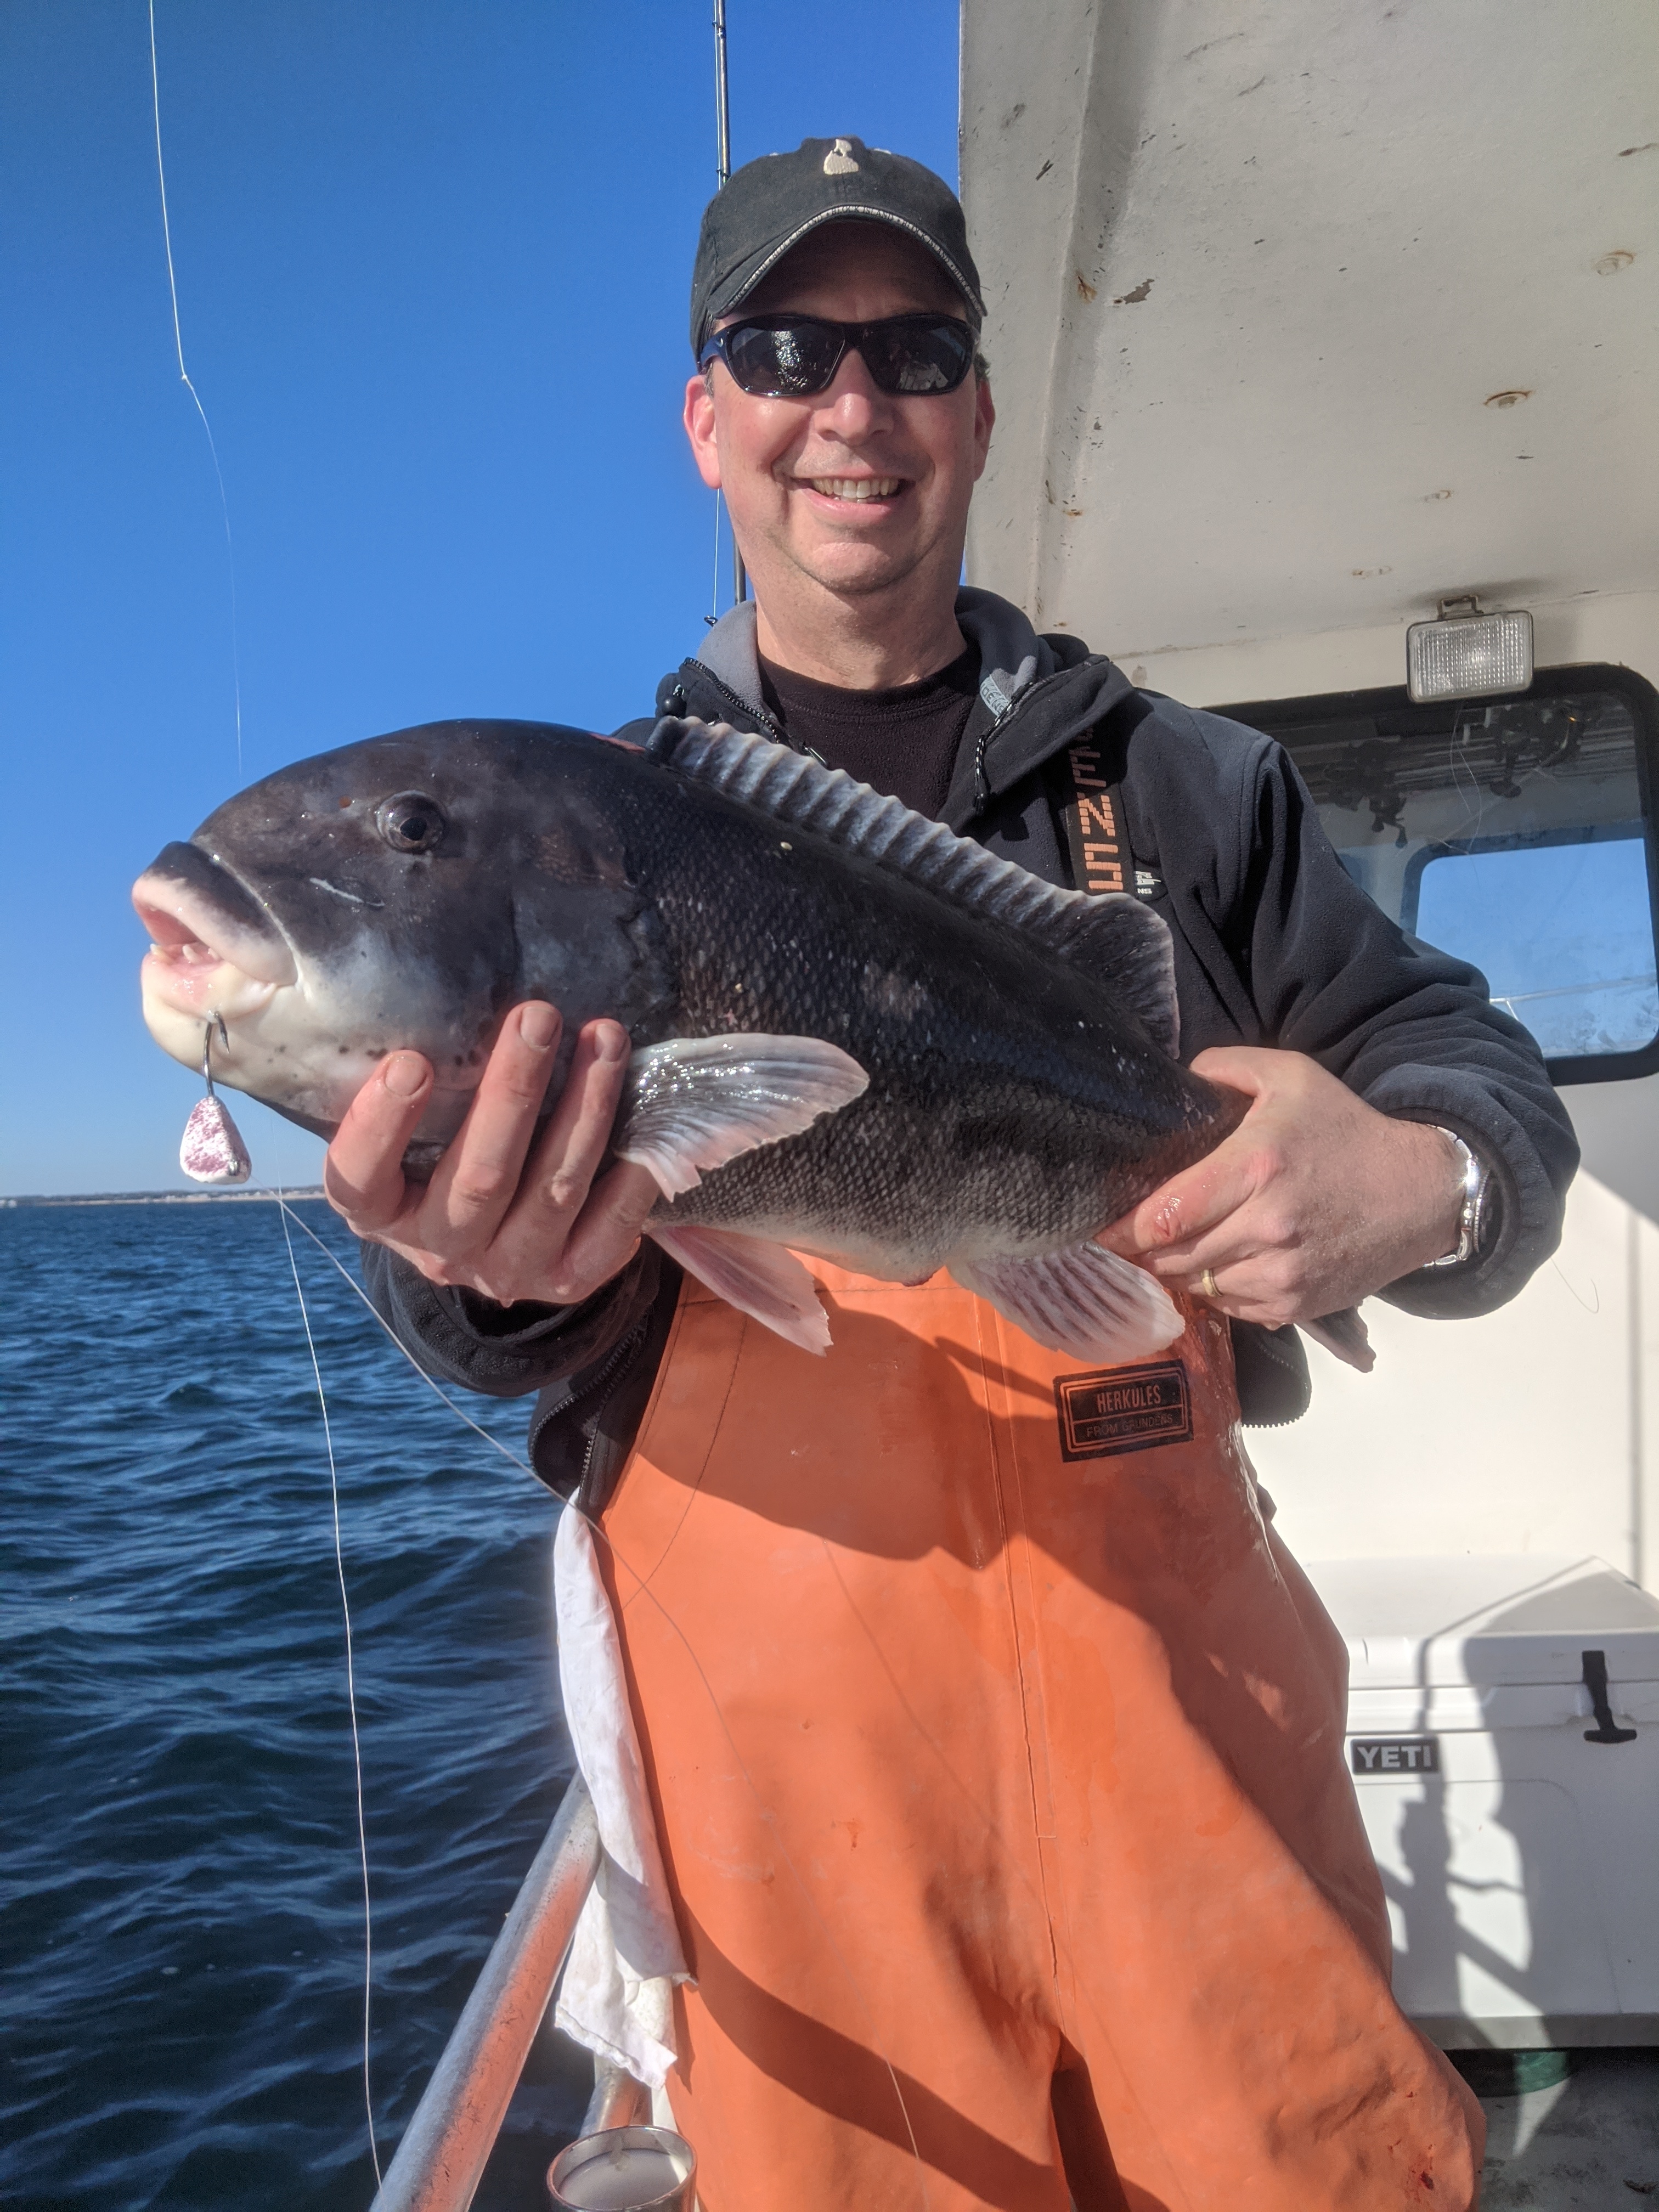 The blackfish bite has been excellent this year and Chuck Landenheim and friends filled their coolers with nice specimens like this aboard the Montauk charter boat Double D on a nice day this past week. 